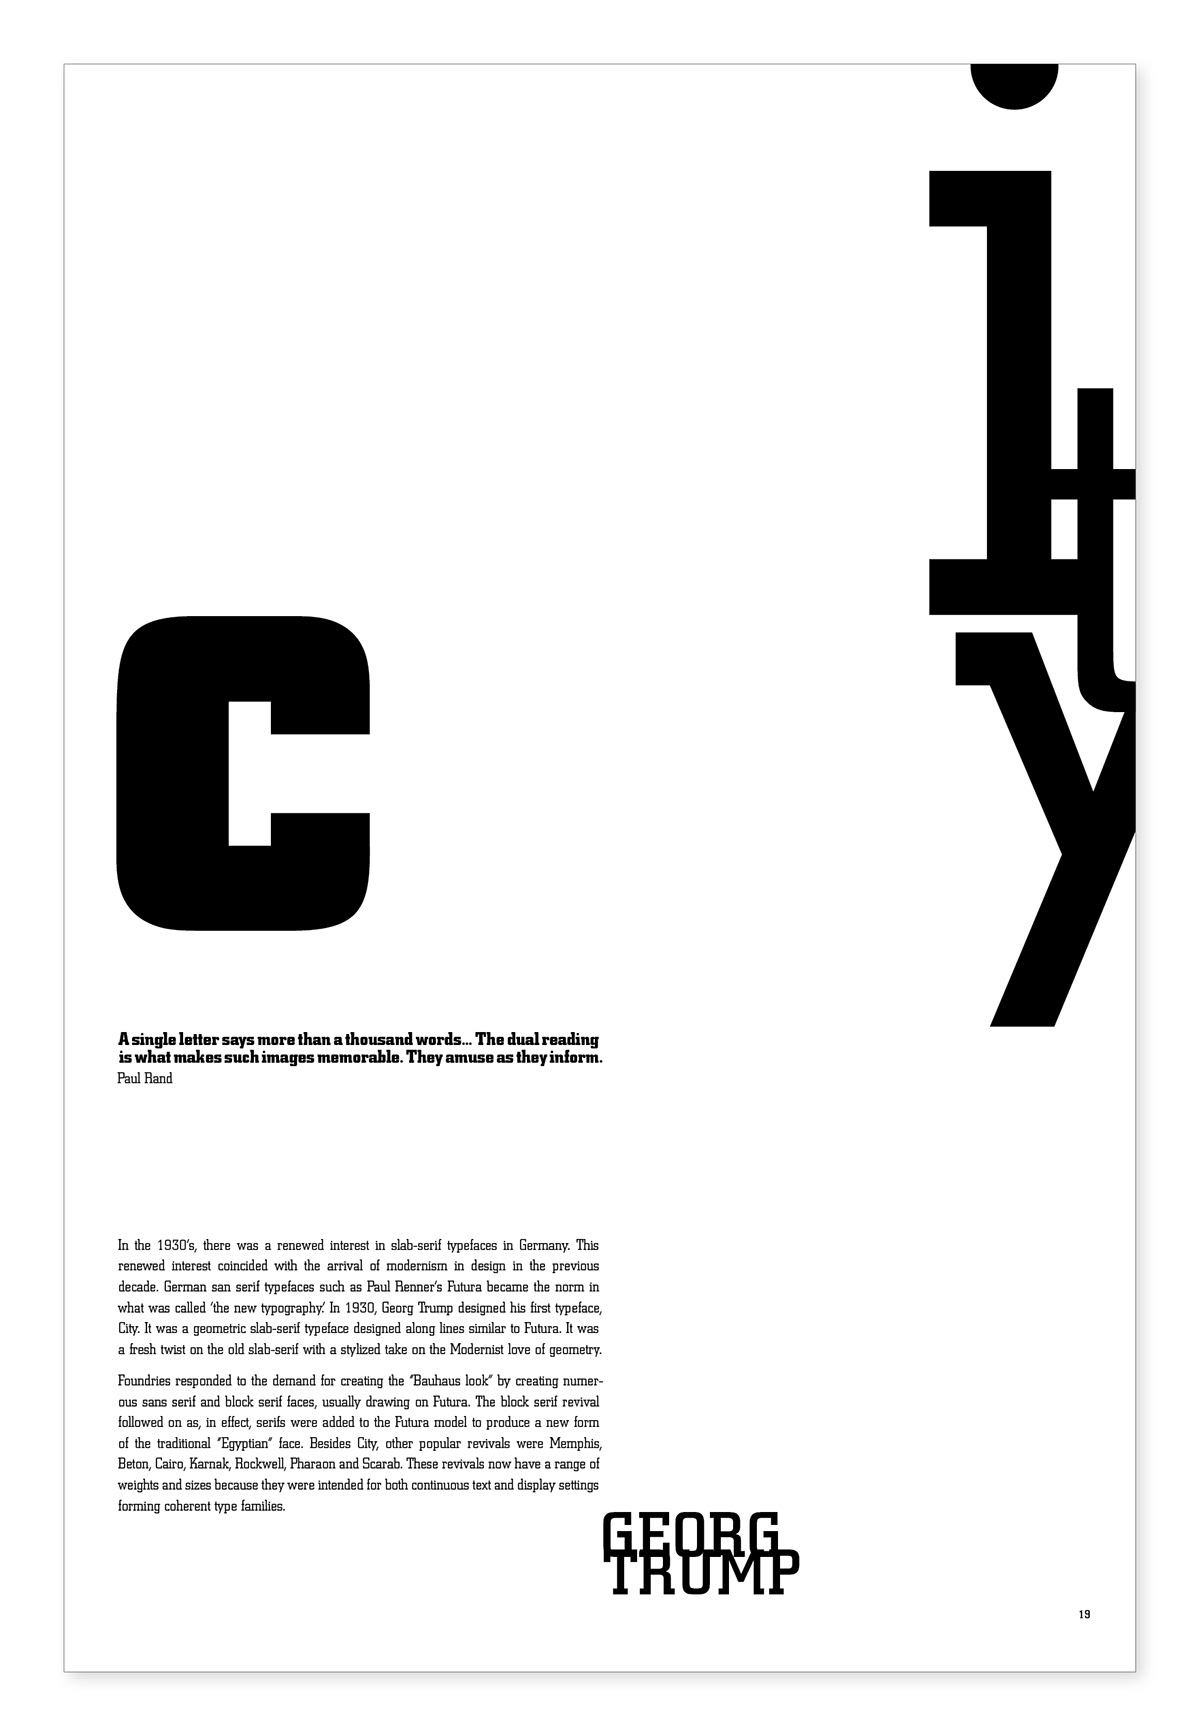 type design ohio univesity type font page layout history city chicago aiga AIGA Chicago Student work foundation letters structure exploration